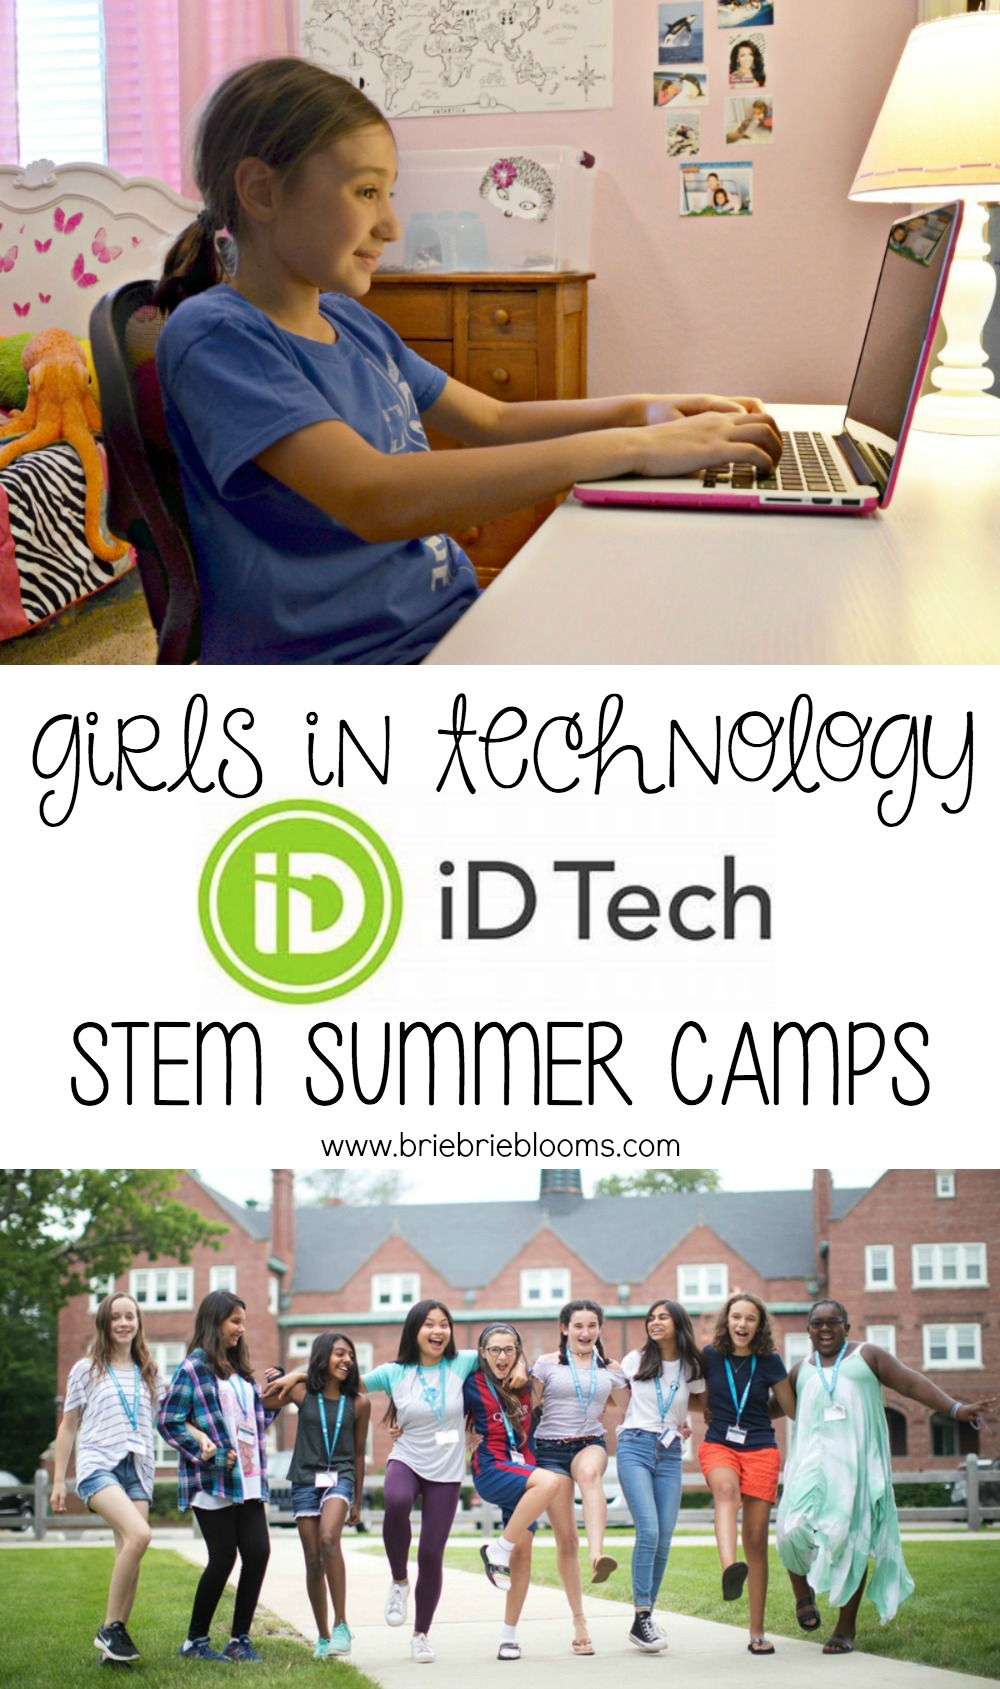 iD Tech STEM summer camps are great for girls in technology to further develop their skills with a wide range of educational opportunities.